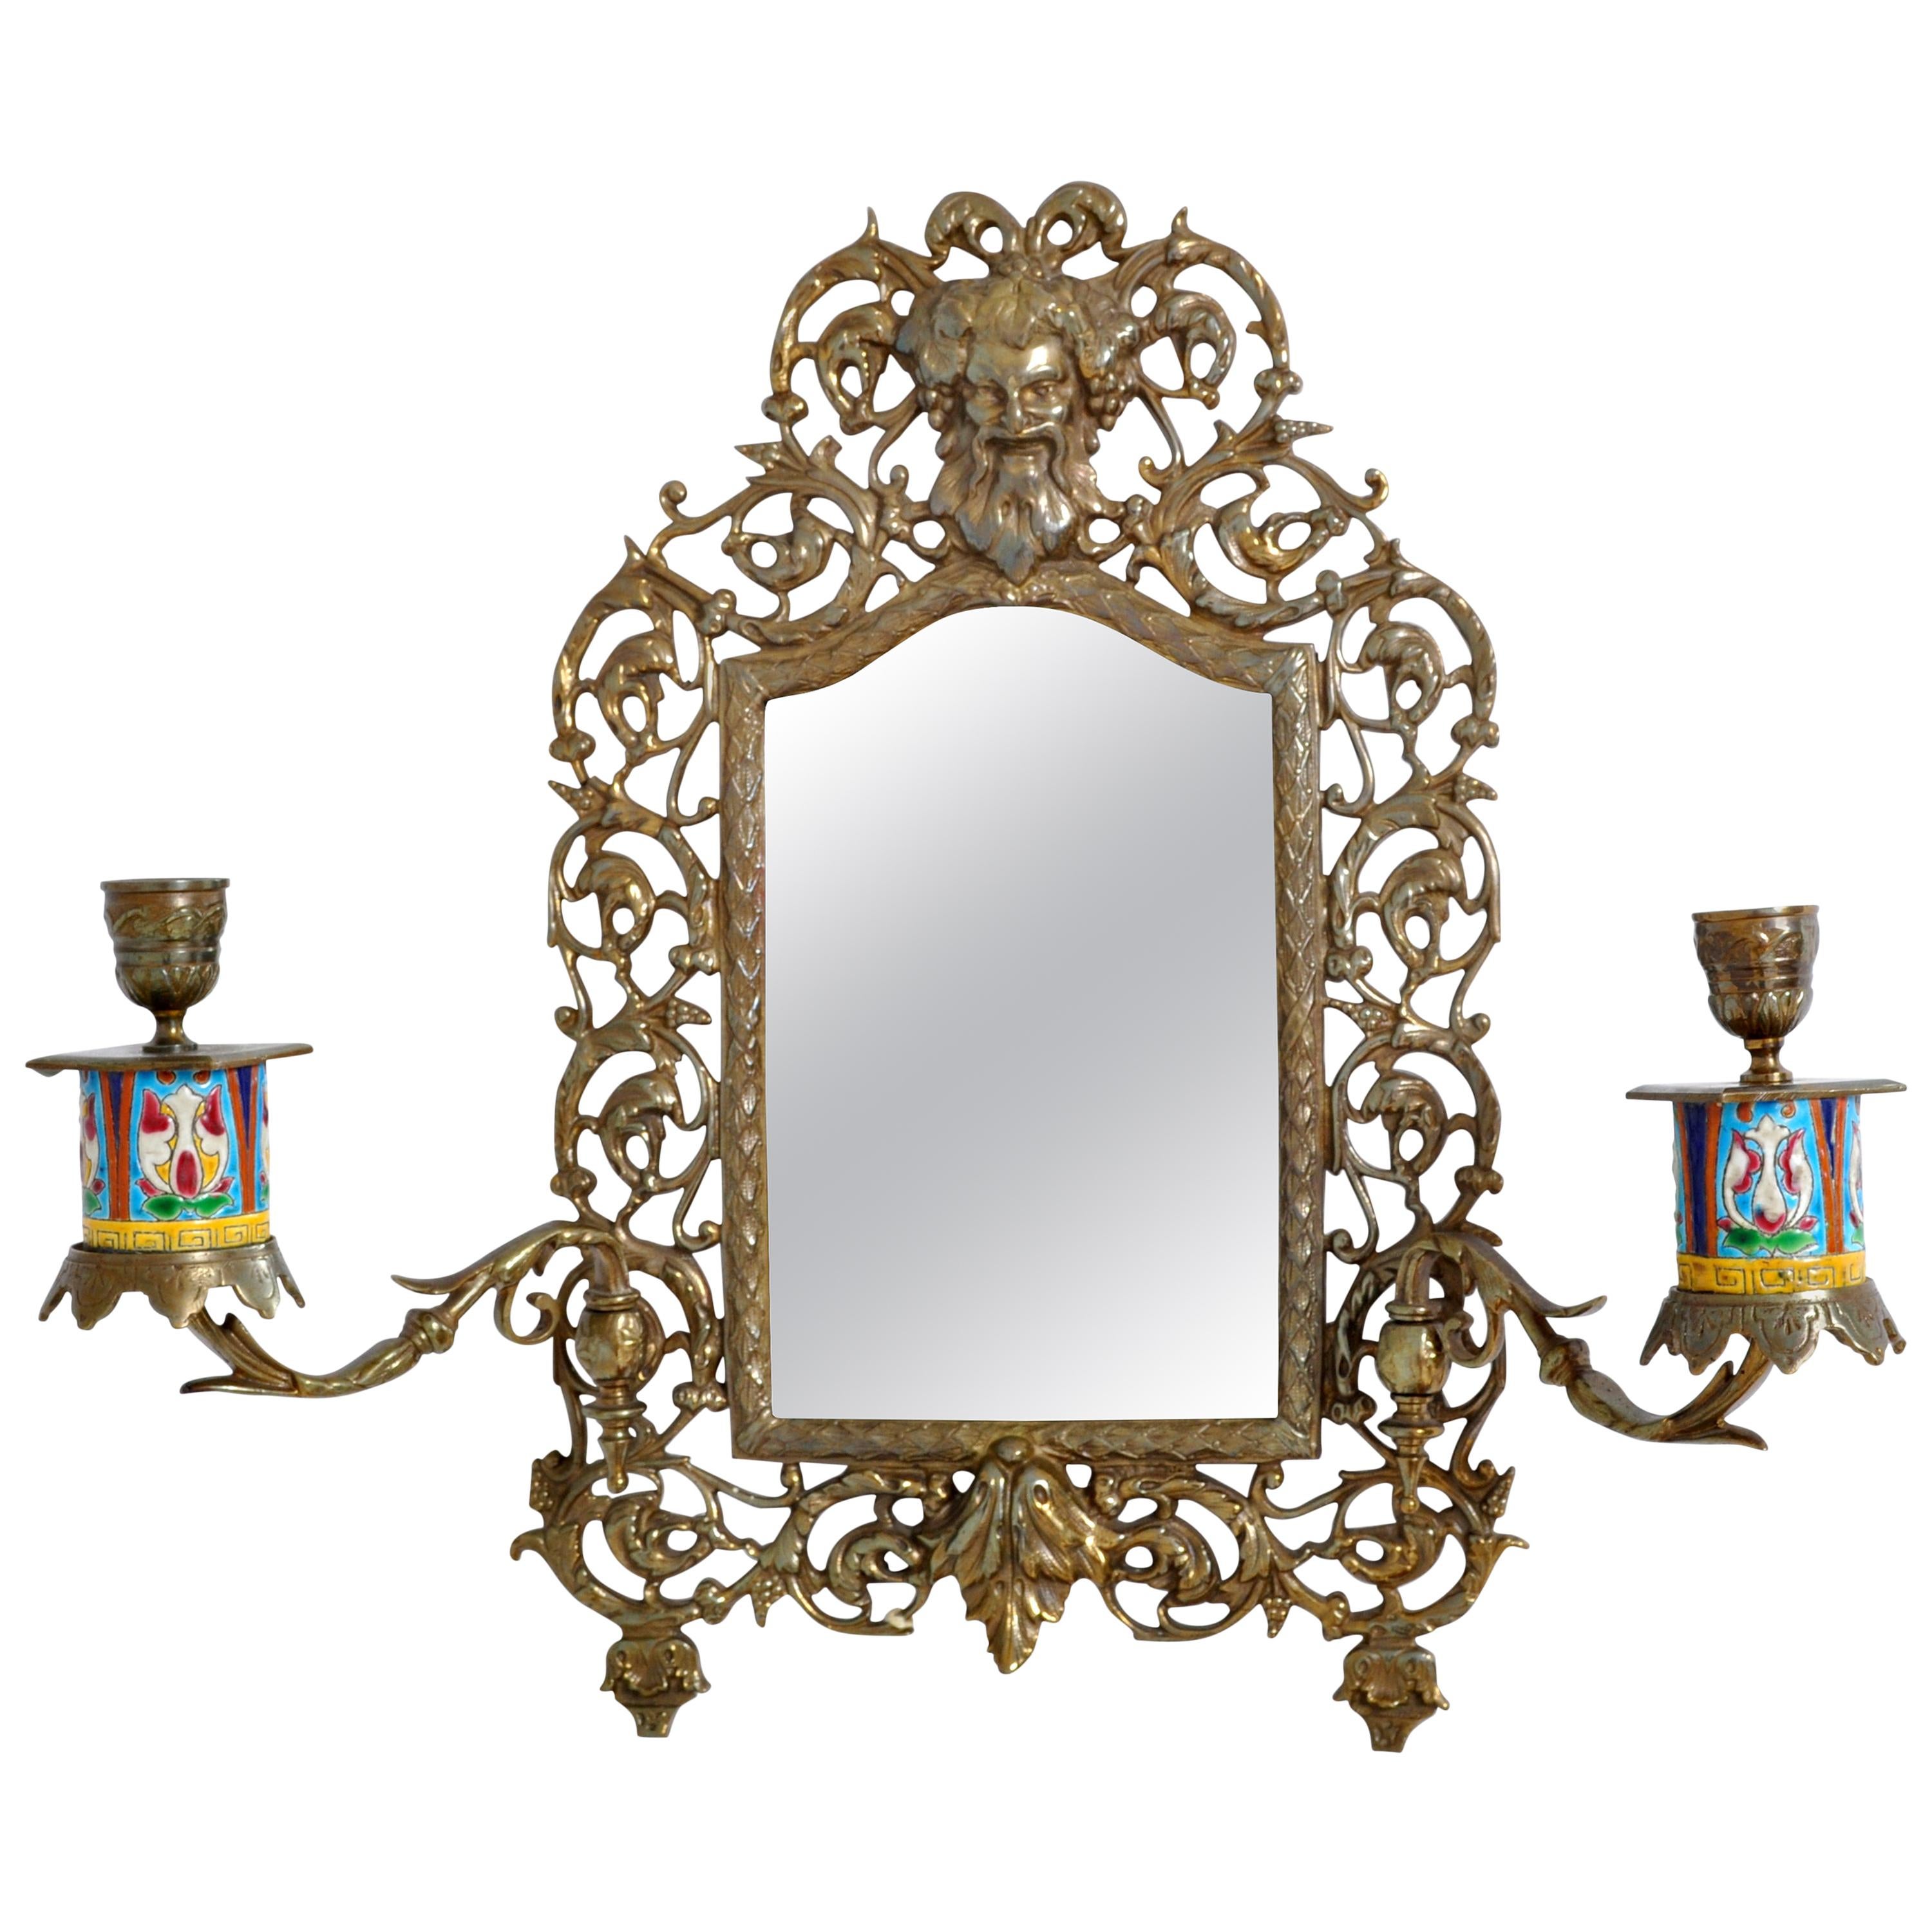 Antique Neoclassical French Brass Enamel Wall Mirror with Candle Sconces, 1890